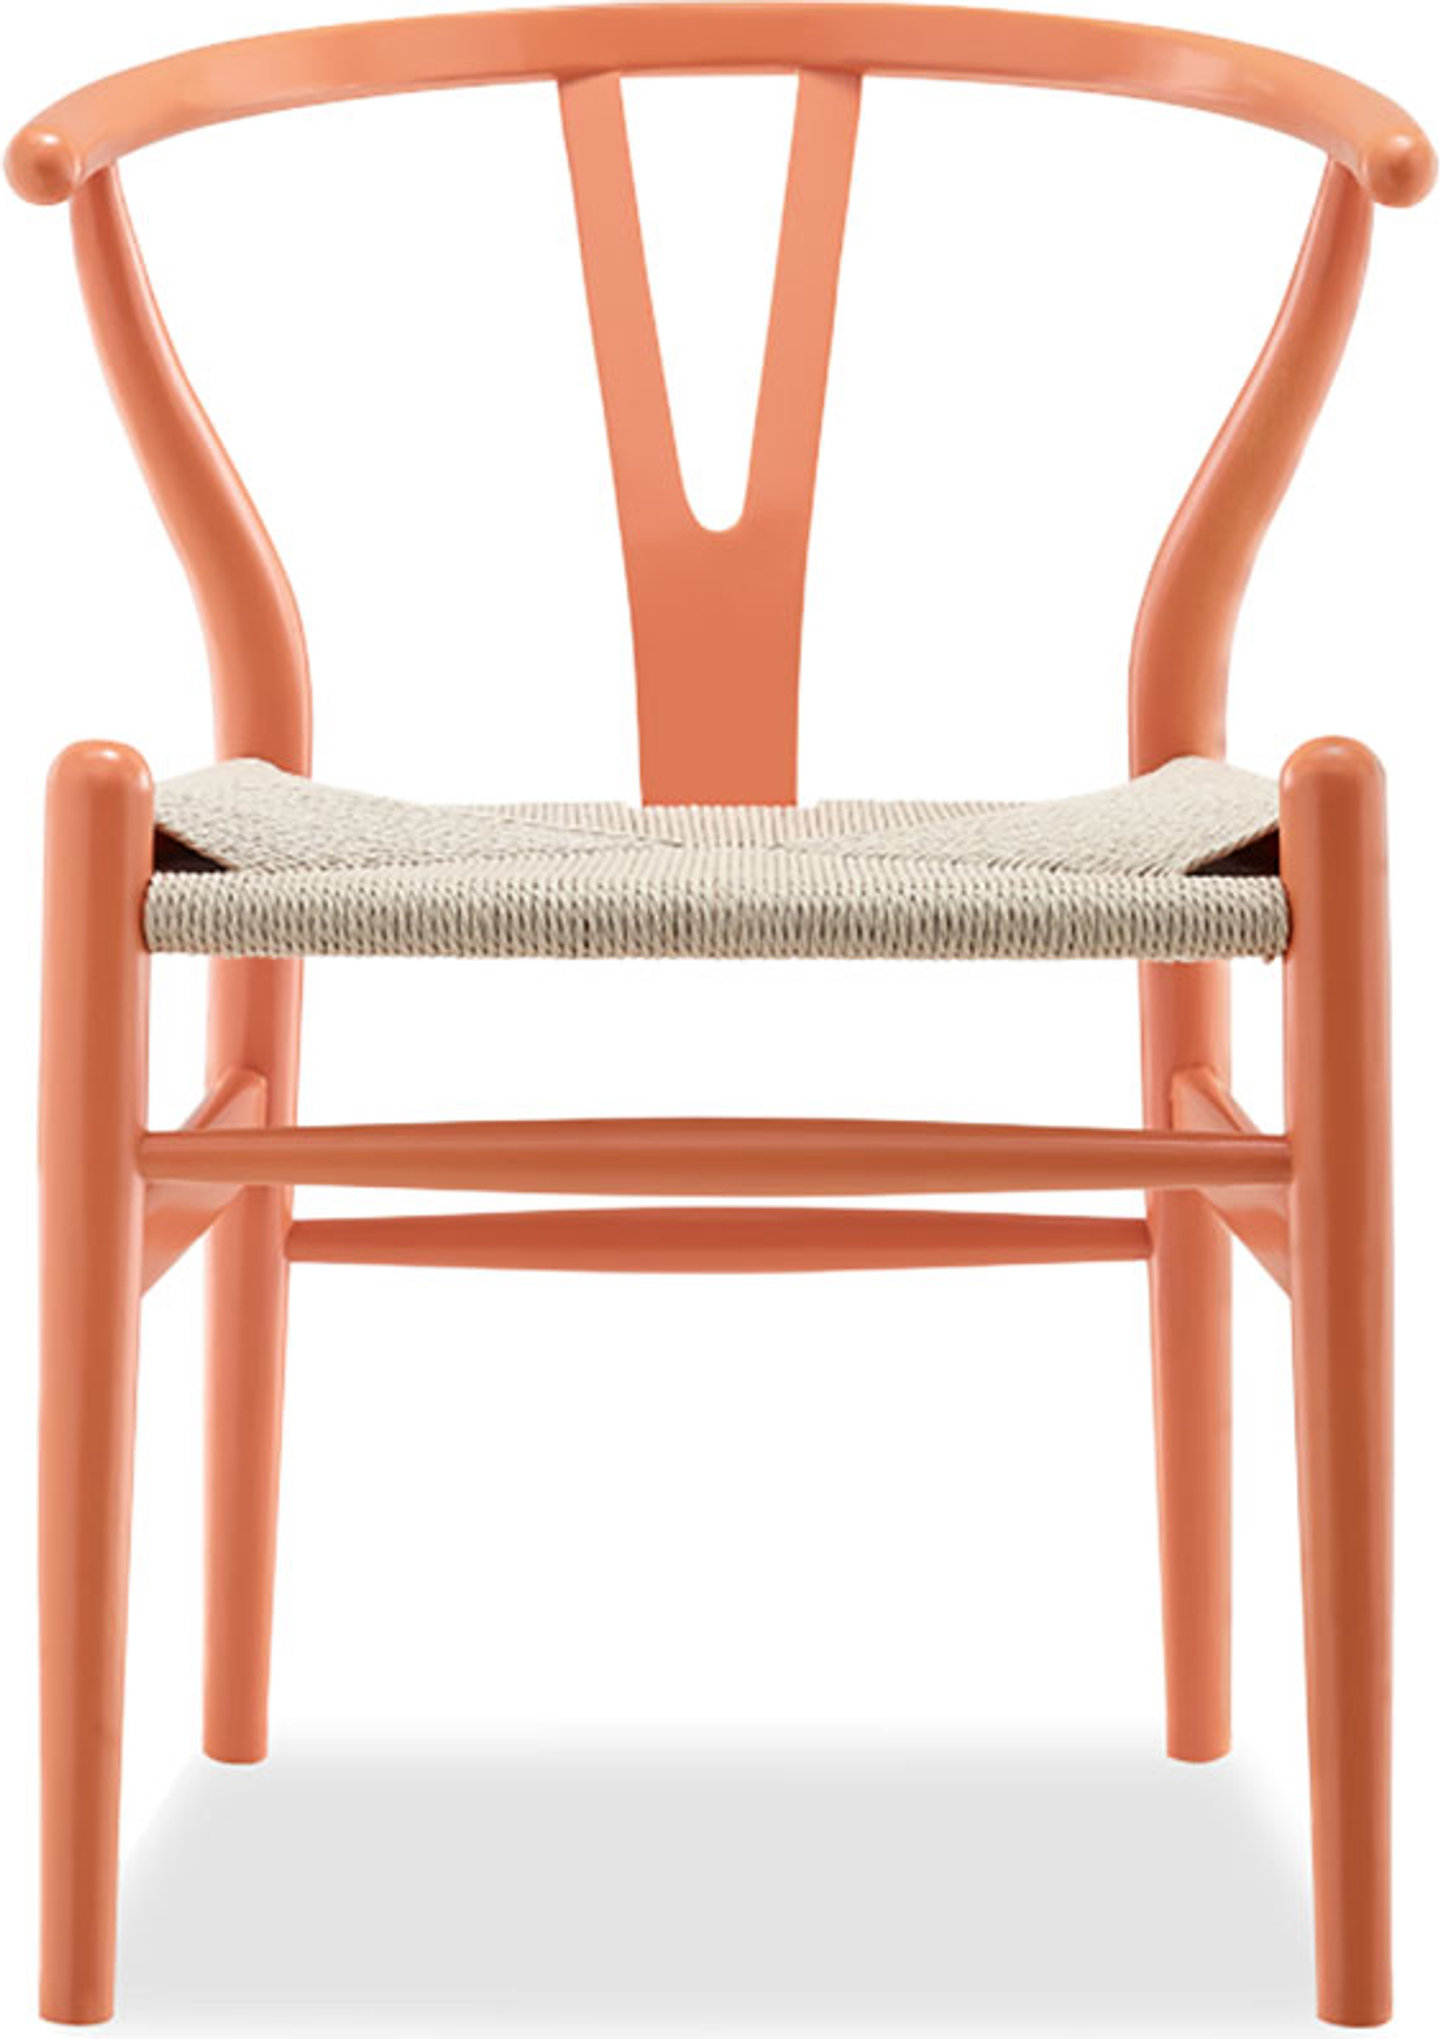 Wishbone (Y) Chair - CH24 Lacquered/Orange image.